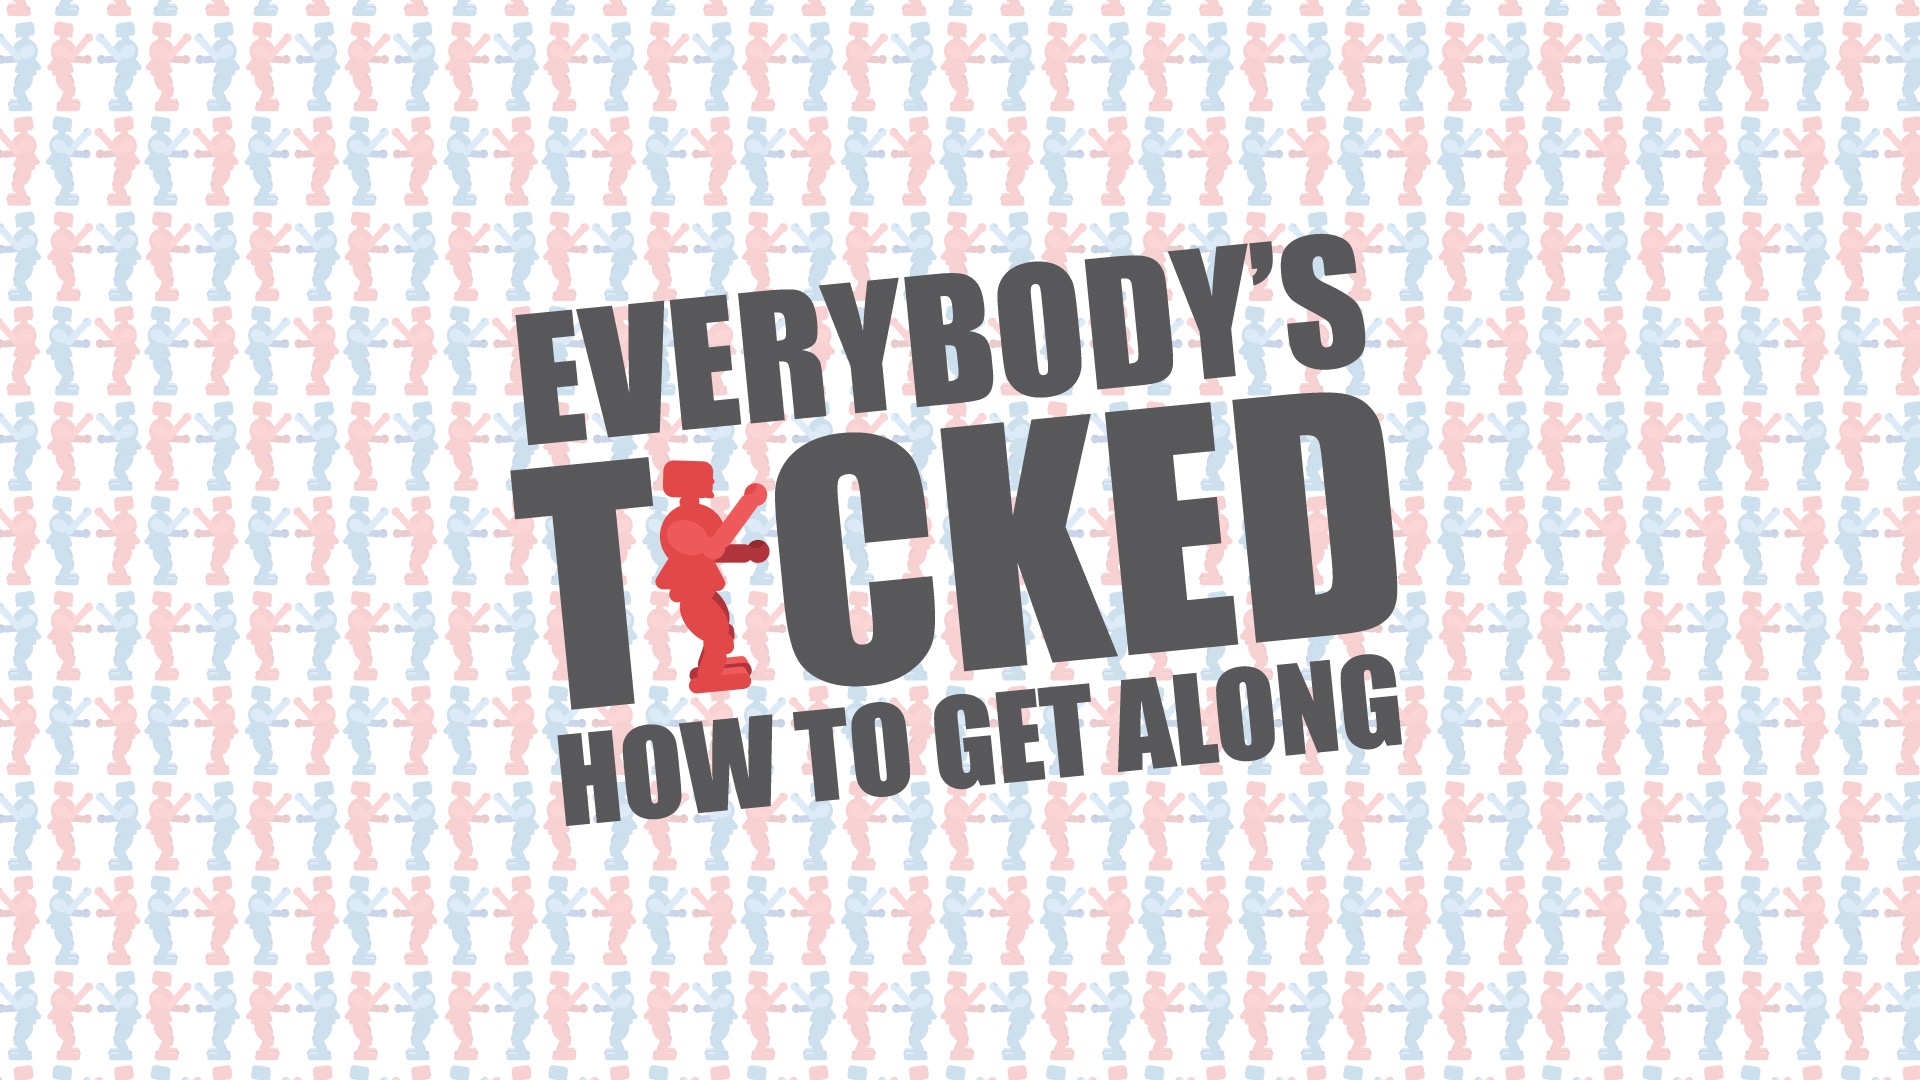 Everybody's Ticked: How To Get Along - Part IV